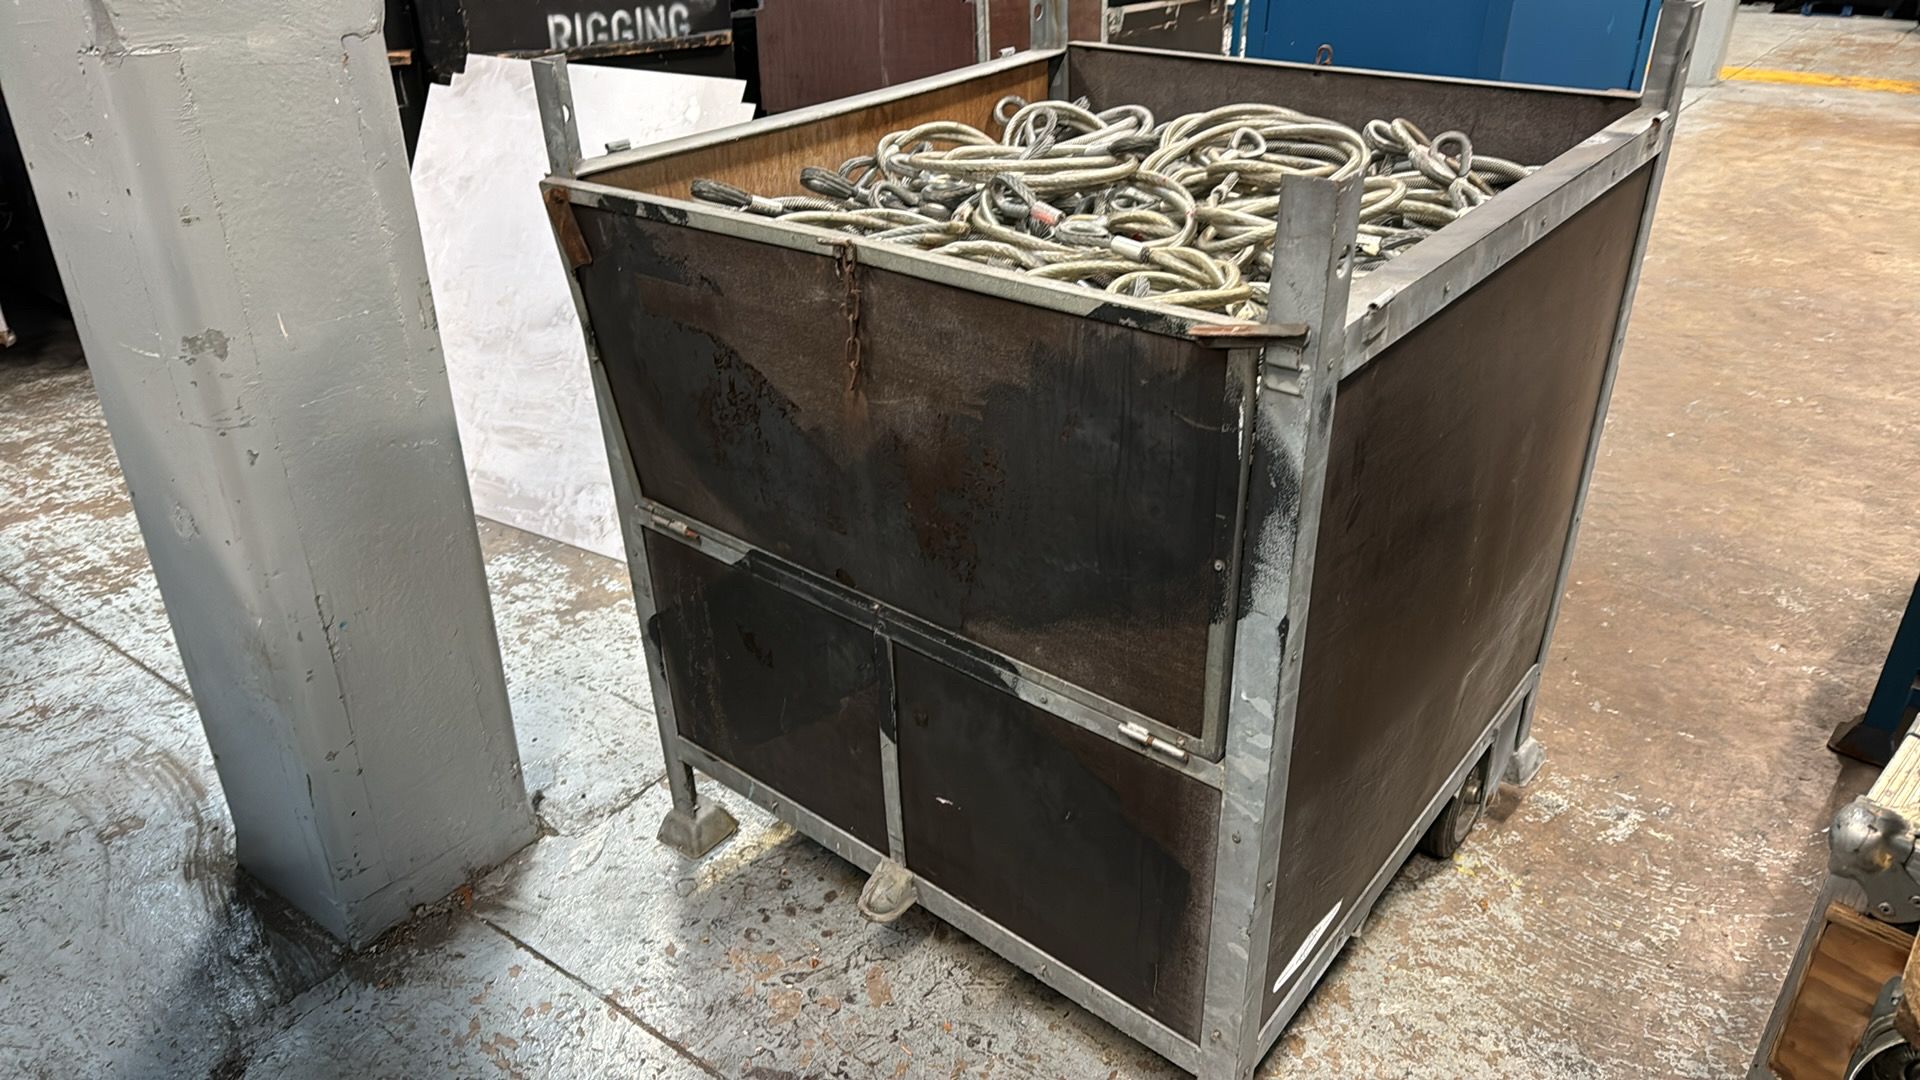 Crate, full of industrial rigging wire - Image 6 of 10